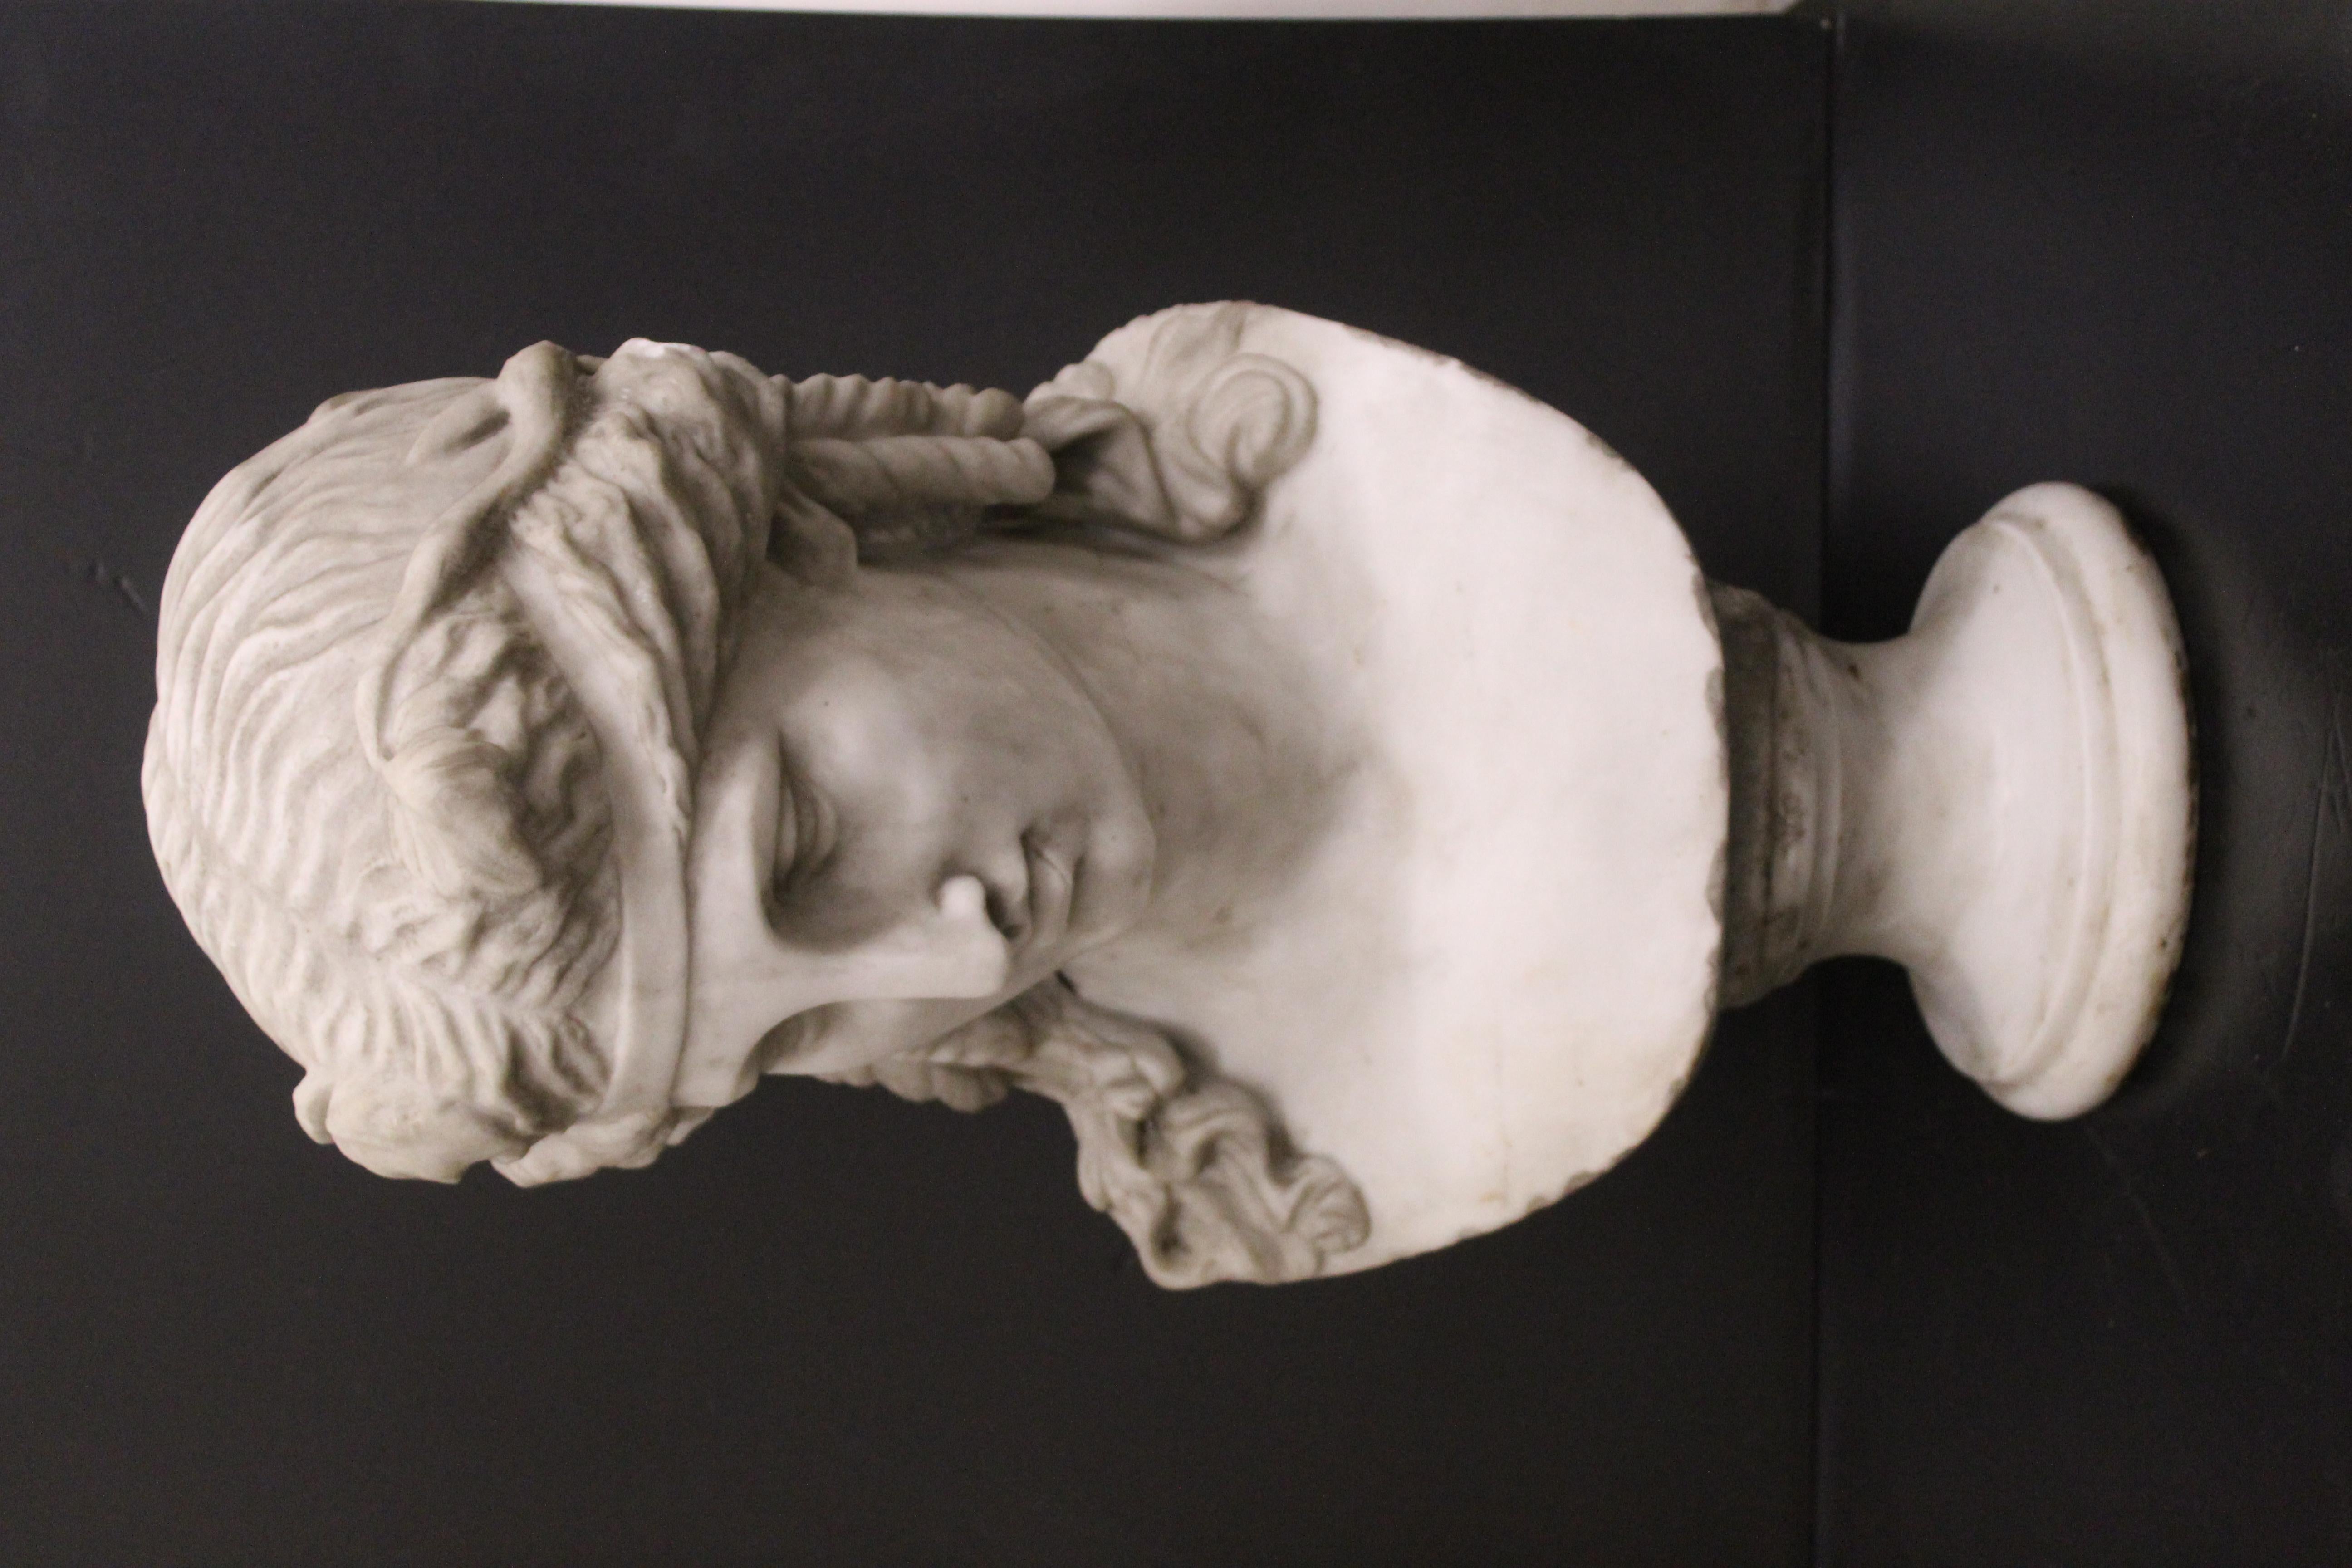 Large head of Dionysus sculpture in white marble, 19th century.
 